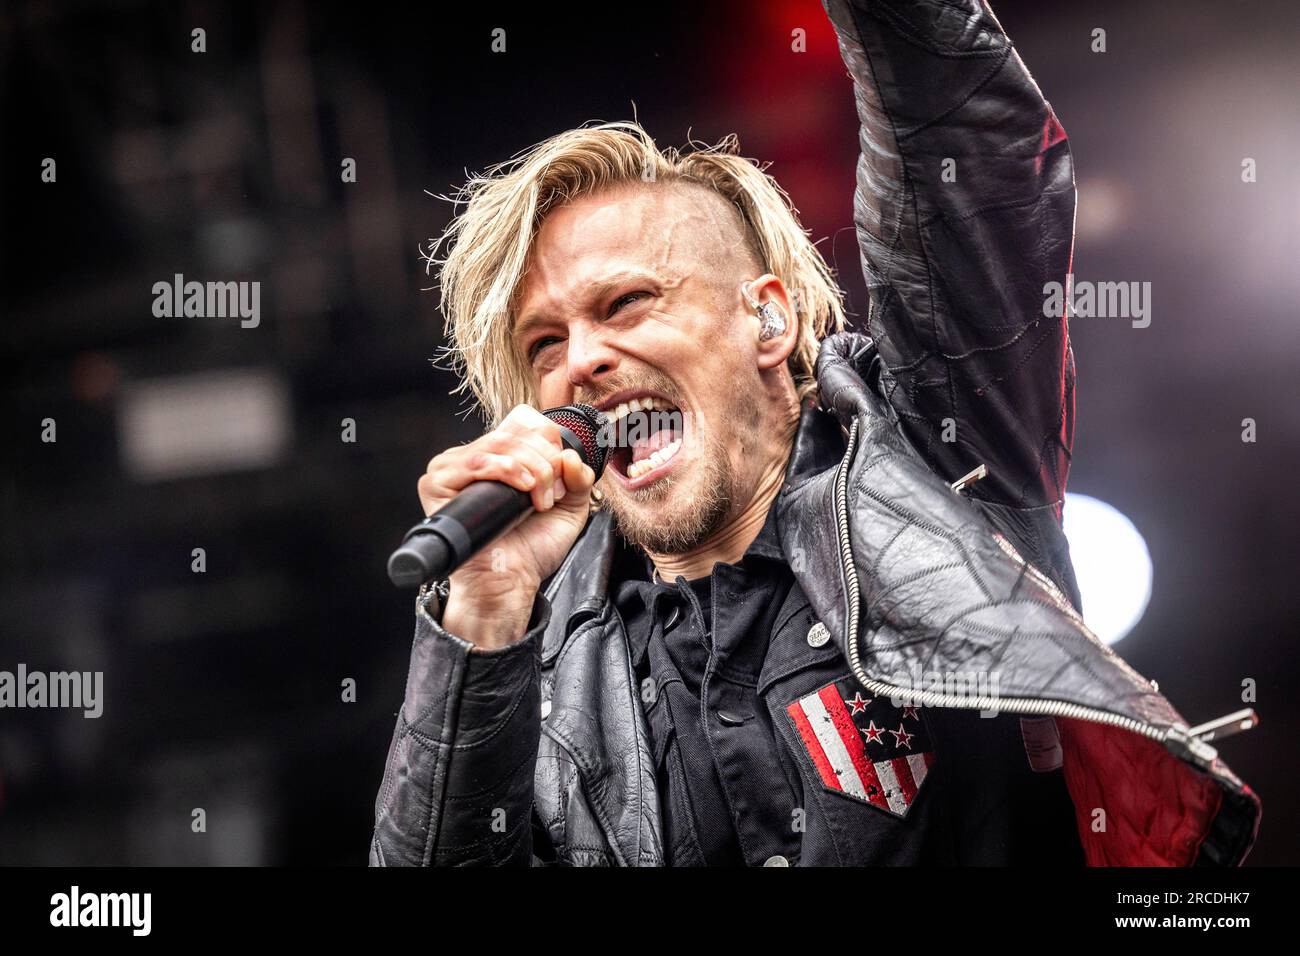 Oslo, Norway. 21st, June 2023. The American heavy metal band Skid Row performs a live concert during the Norwegian music festival Tons of Rock 2023 in Oslo. Here vocalist Erik Gronwall is seen live on stage. (Photo credit: Gonzales Photo - Terje Dokken). Stock Photo